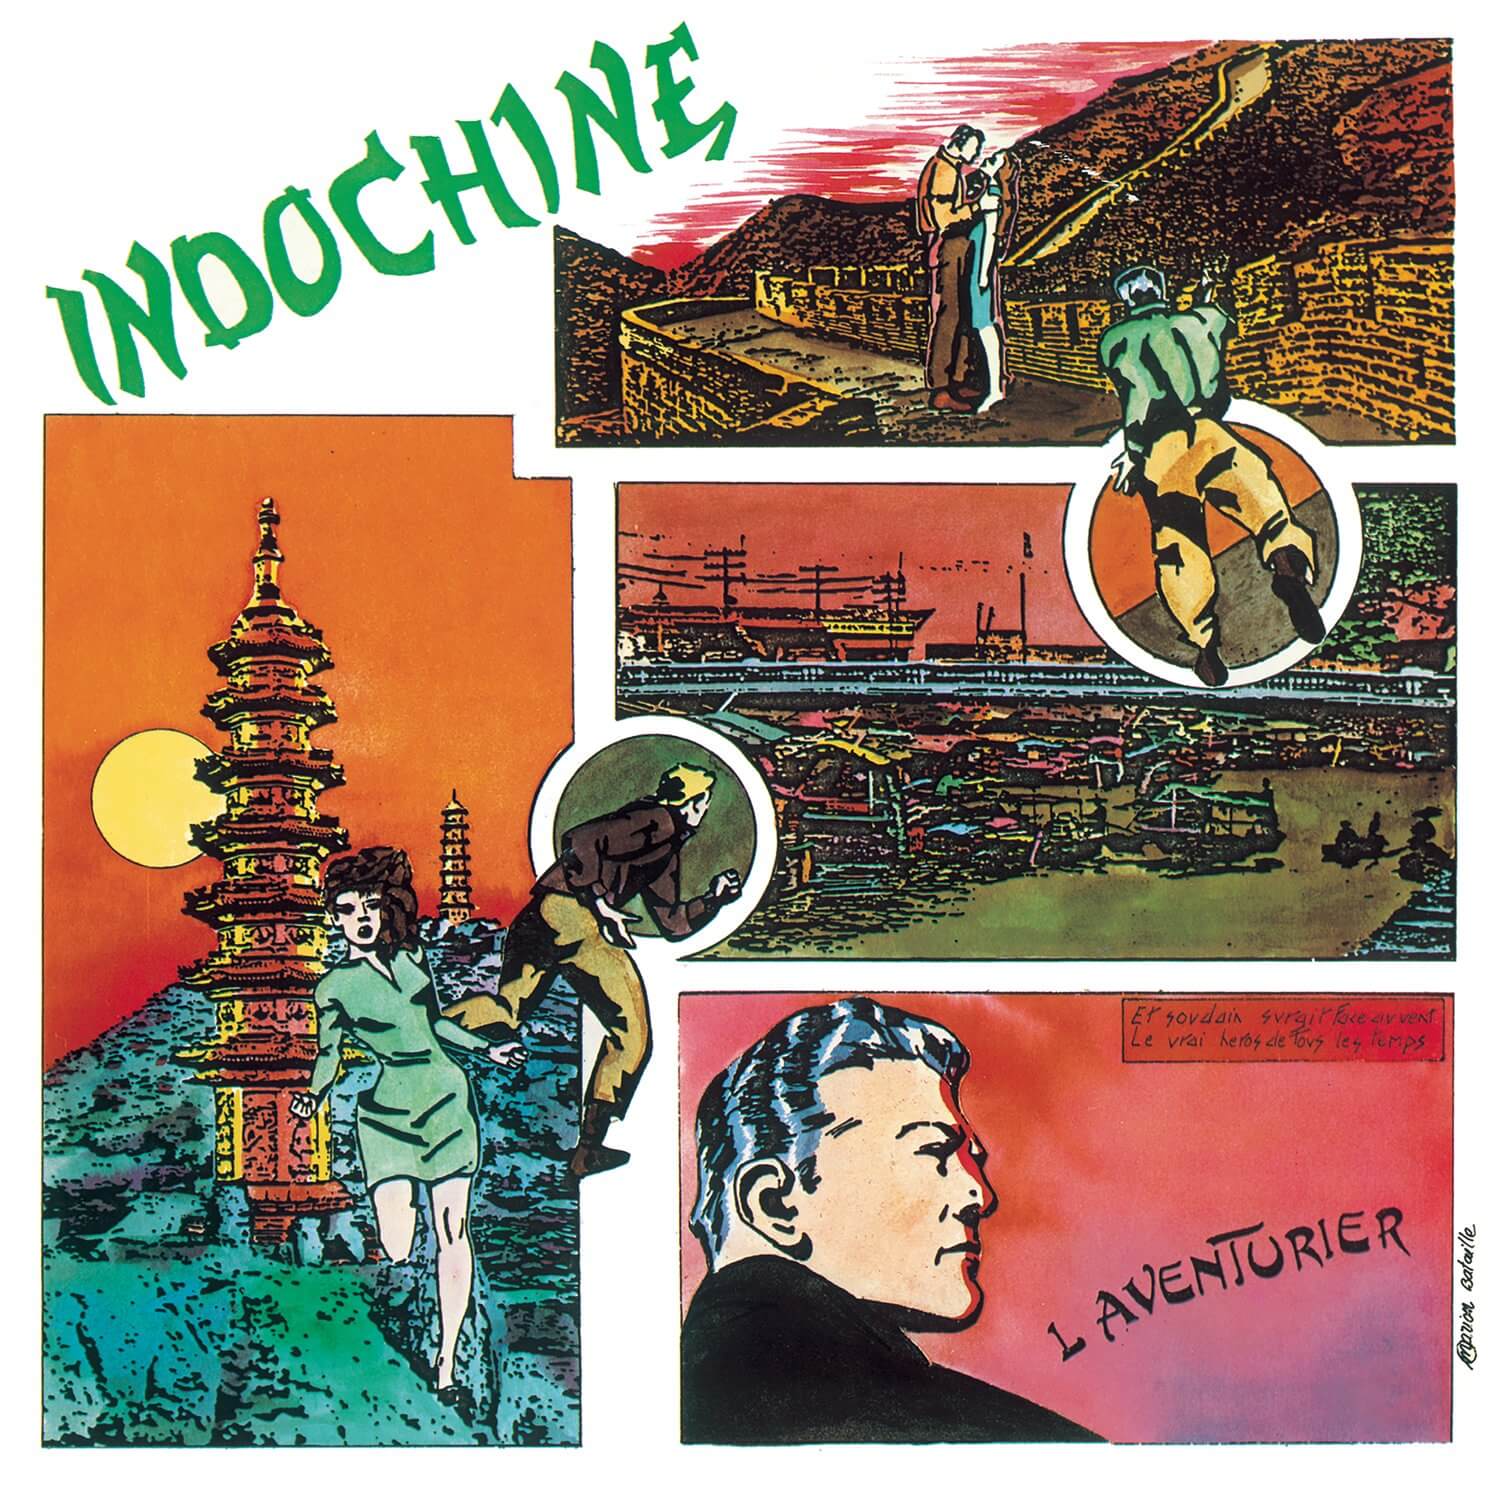 L'aventurier d'Indochine illustrated cover by Marion Bataille